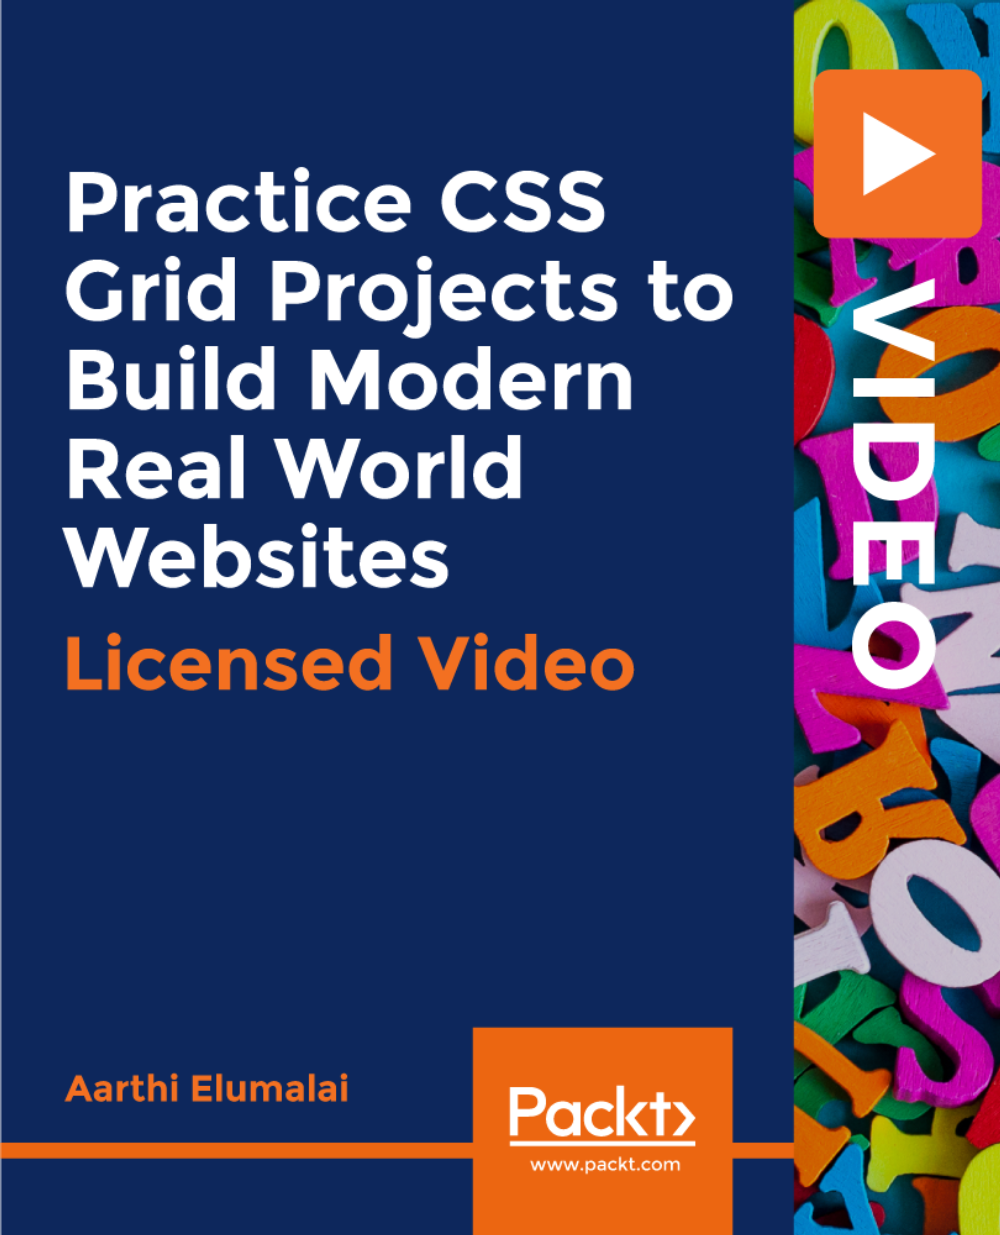 Practice CSS Grid Projects to Build Modern Real World Websites